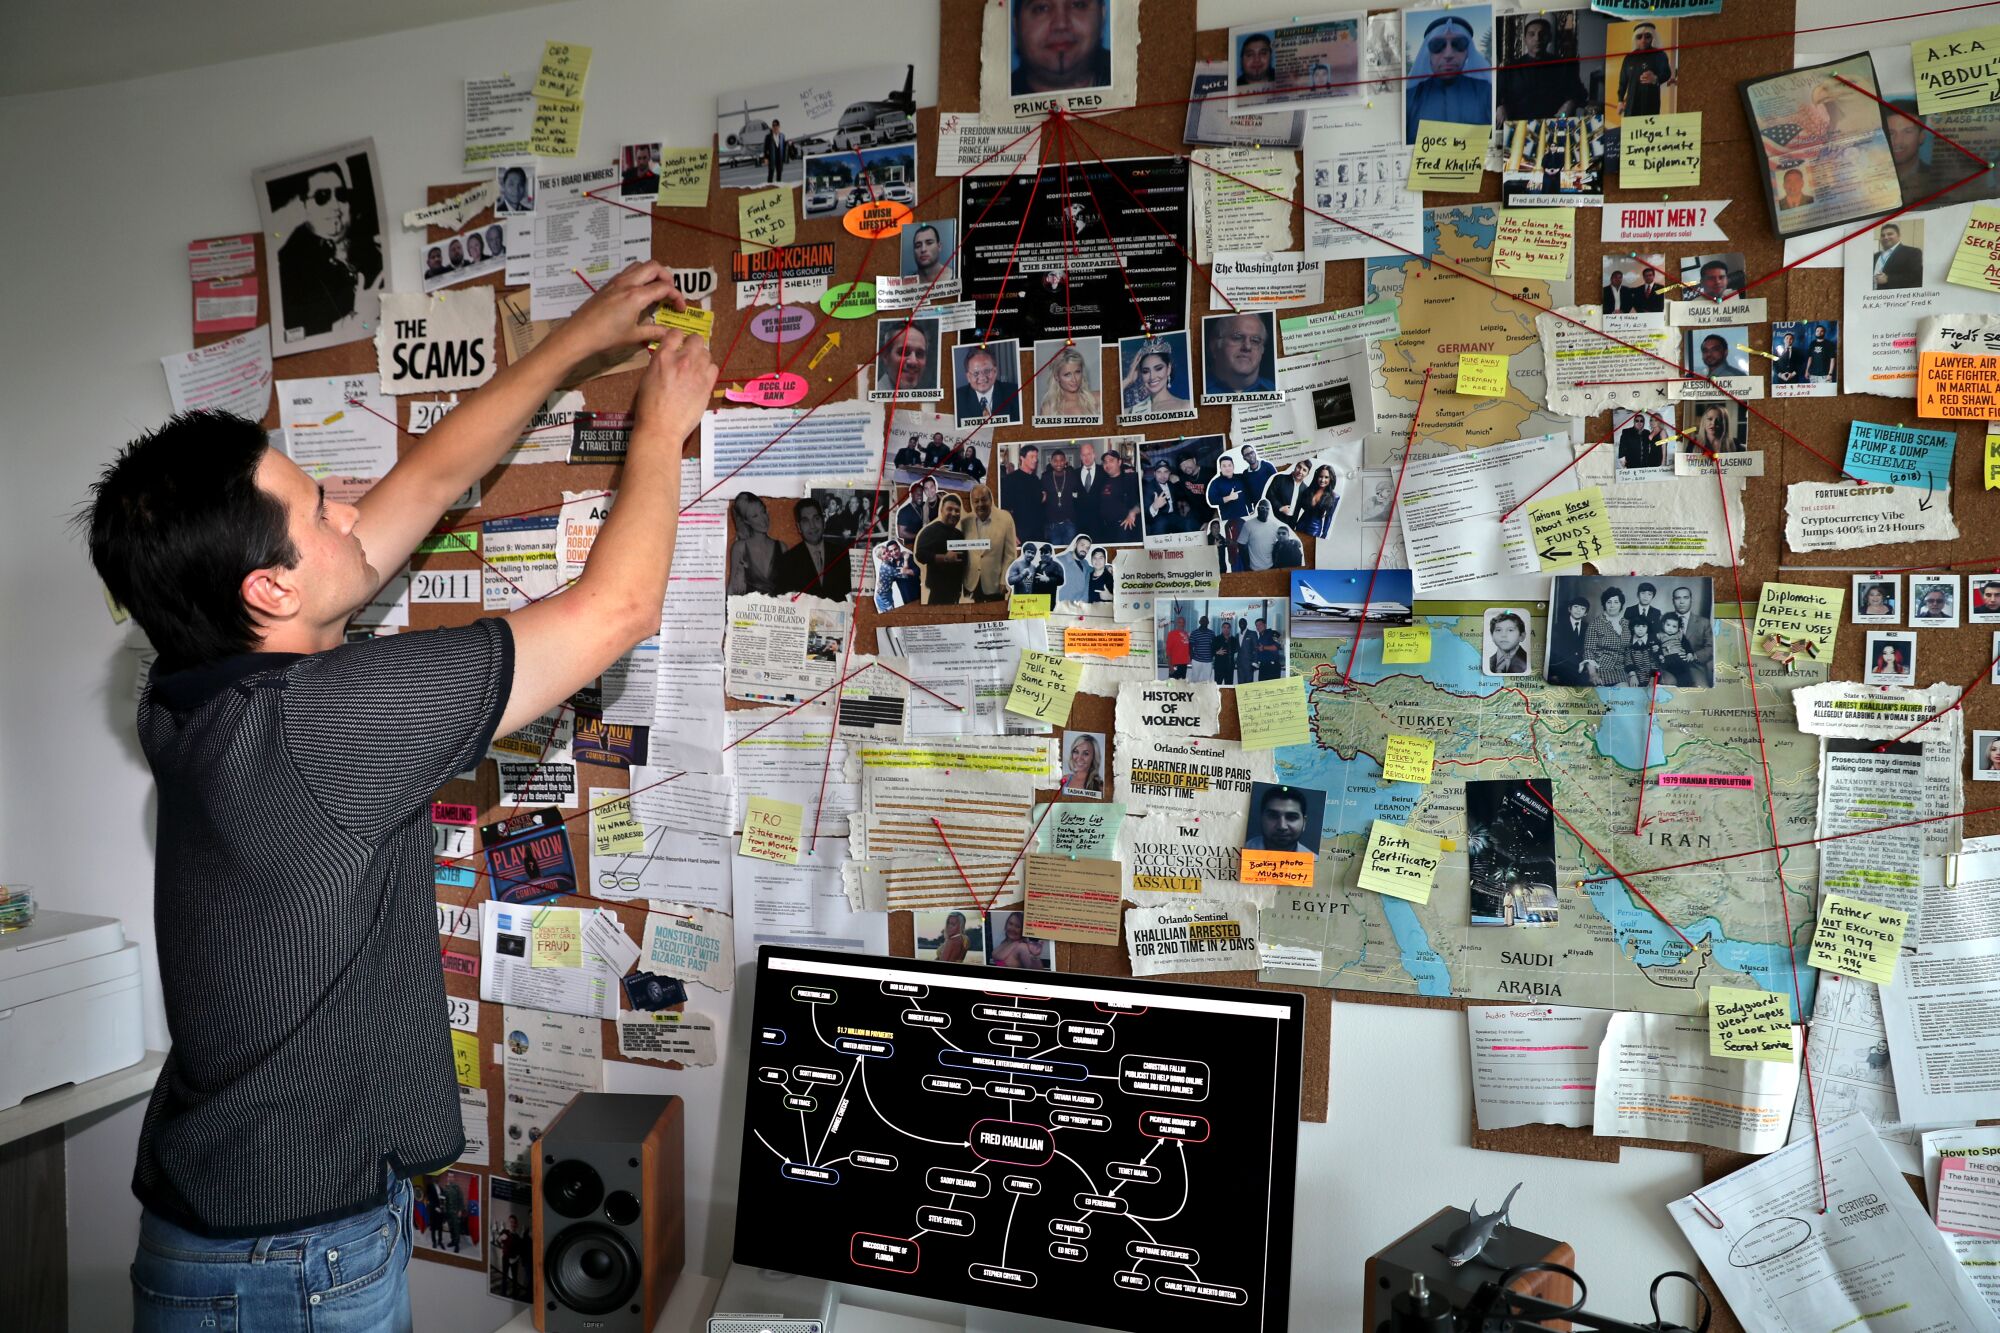 A man at left stands near a large cork board full of news clippings, notes and photos. He's pinning something up